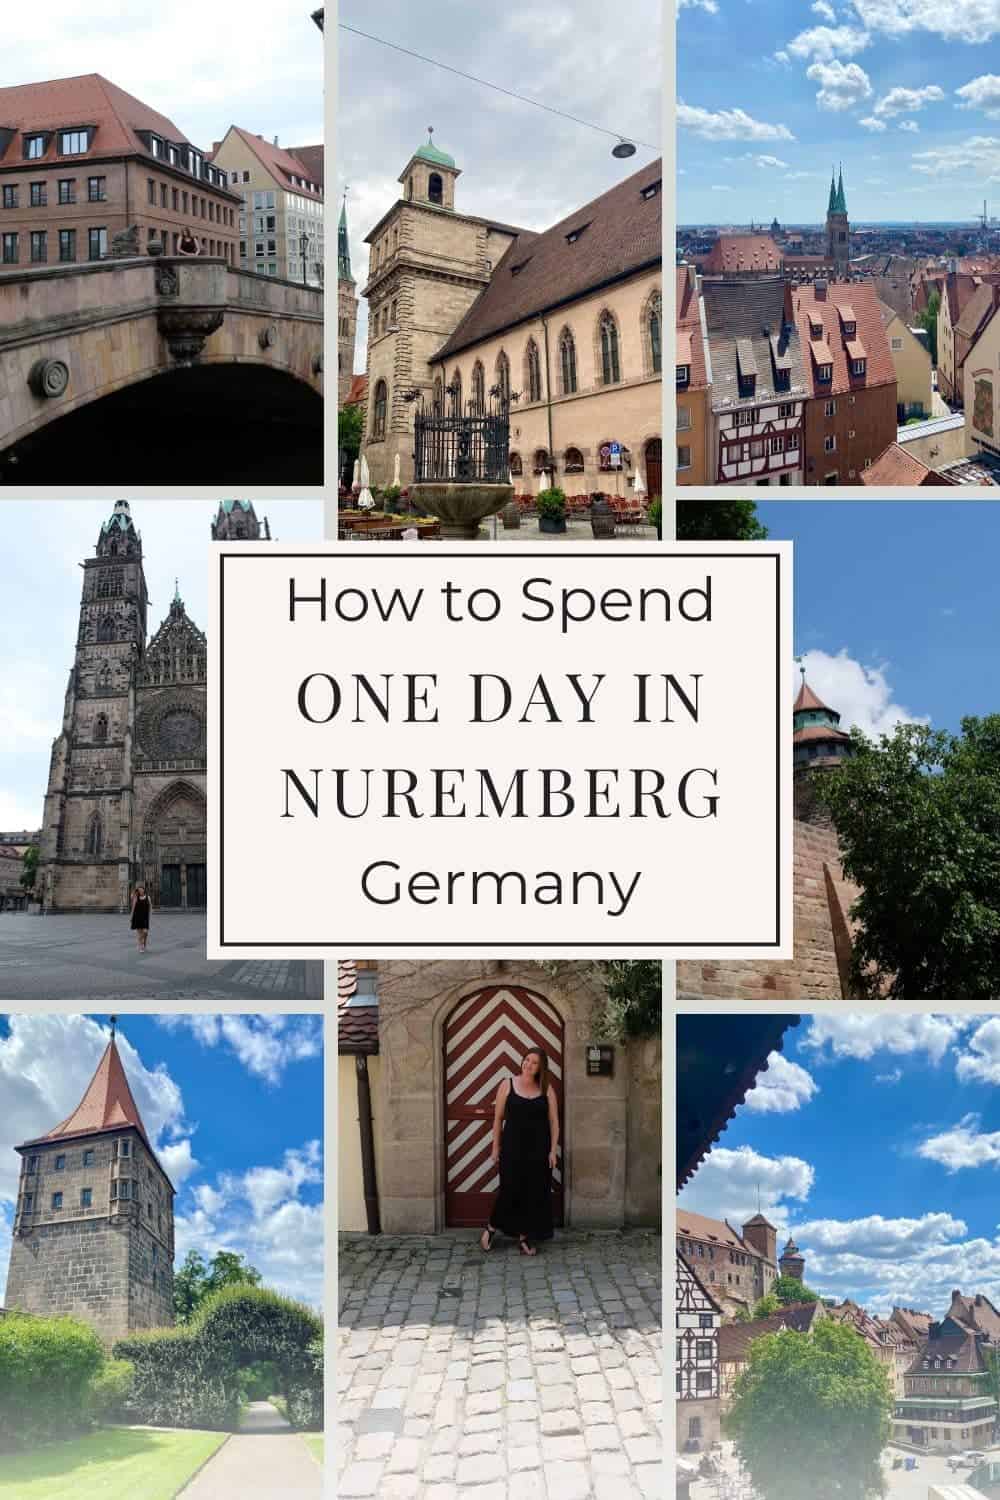 A collage of images capturing the essence of Nuremberg in a day, with snapshots of iconic landmarks like a bridge over the Pegnitz River, the robust facade of St. Sebaldus Church, panoramic city views, the majestic Nuremberg Castle, and a woman traveler by a patterned doorway. The phrase 'How to Spend ONE DAY IN NUREMBERG Germany' headlines the montage.